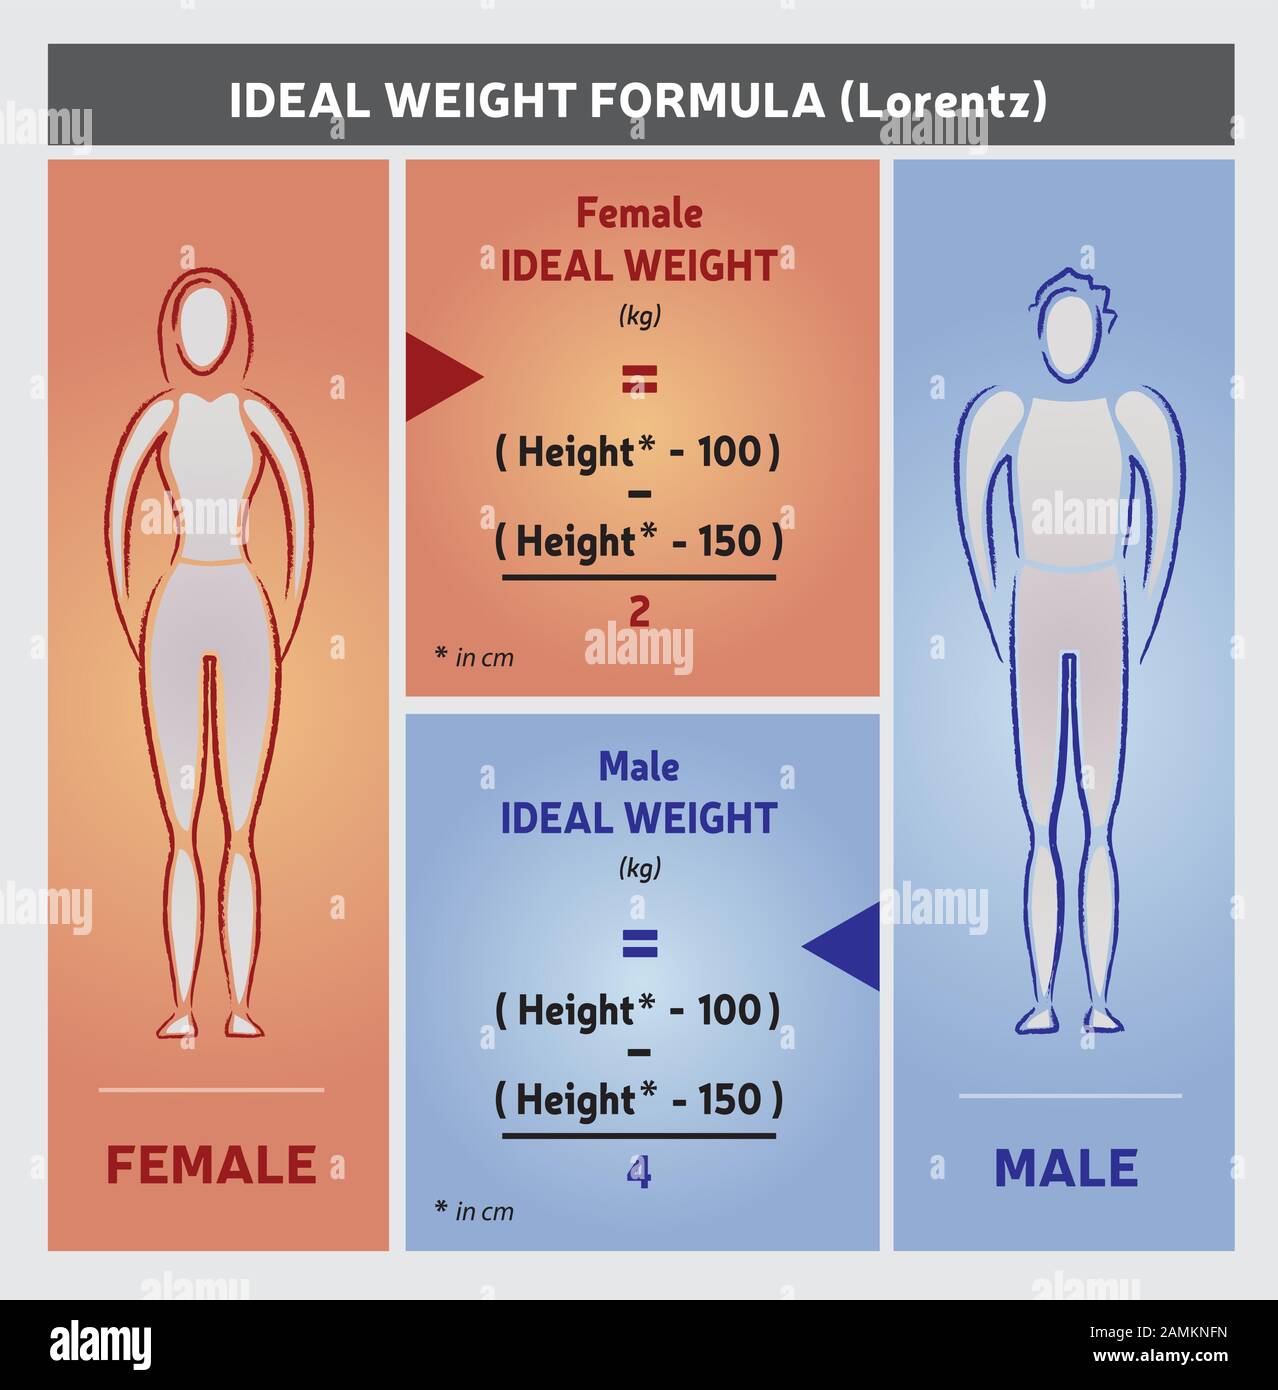 Ideal Weight Formula Illustration - Female and Male Silhouettes Stock Vector